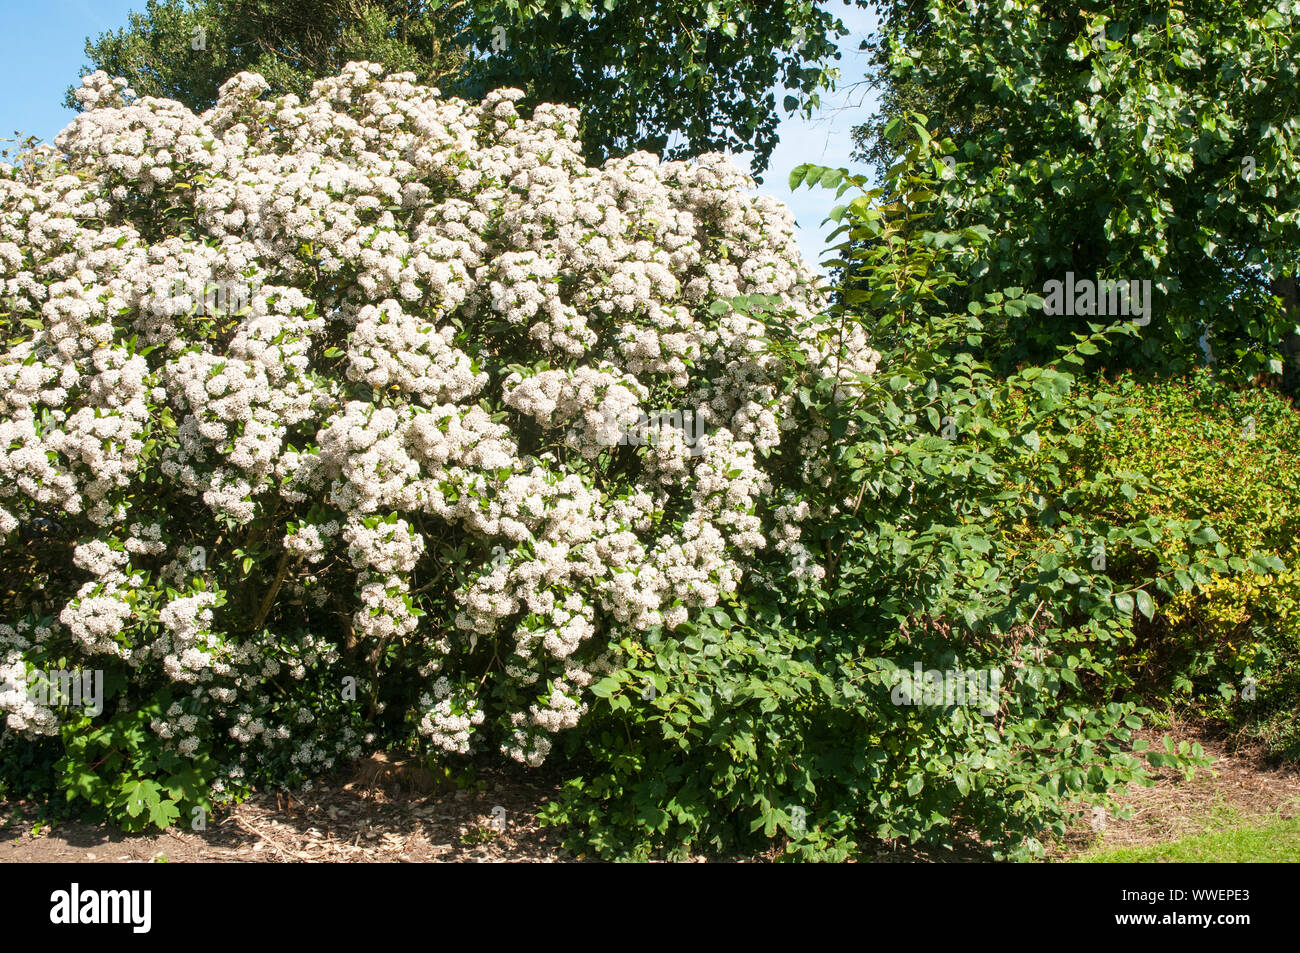 Olearia x haastii Daisy bush covered in corymbs full of white flowers  A evergreen perennial coastal shrub that is ideal for hedges and fully hardyHor Stock Photo